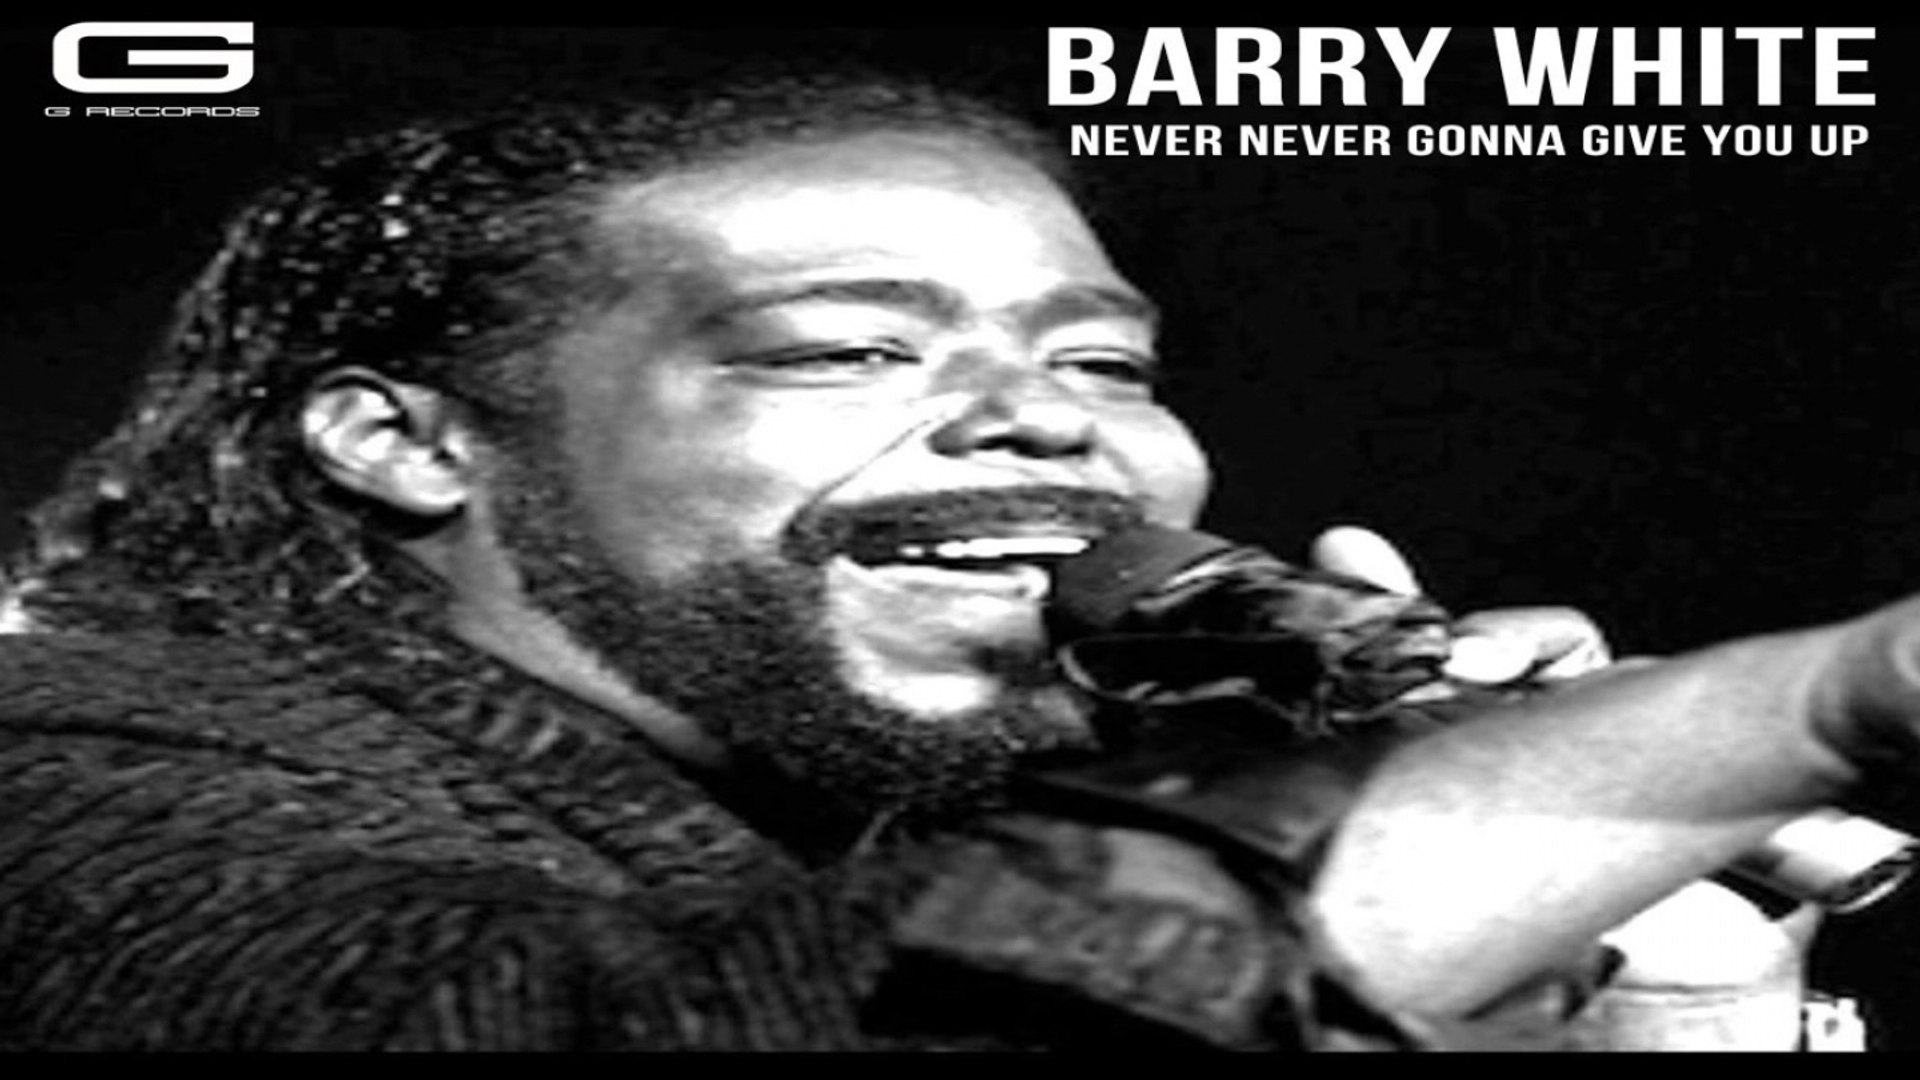 Barry White - Never never gonna give ya up - Video Dailymotion